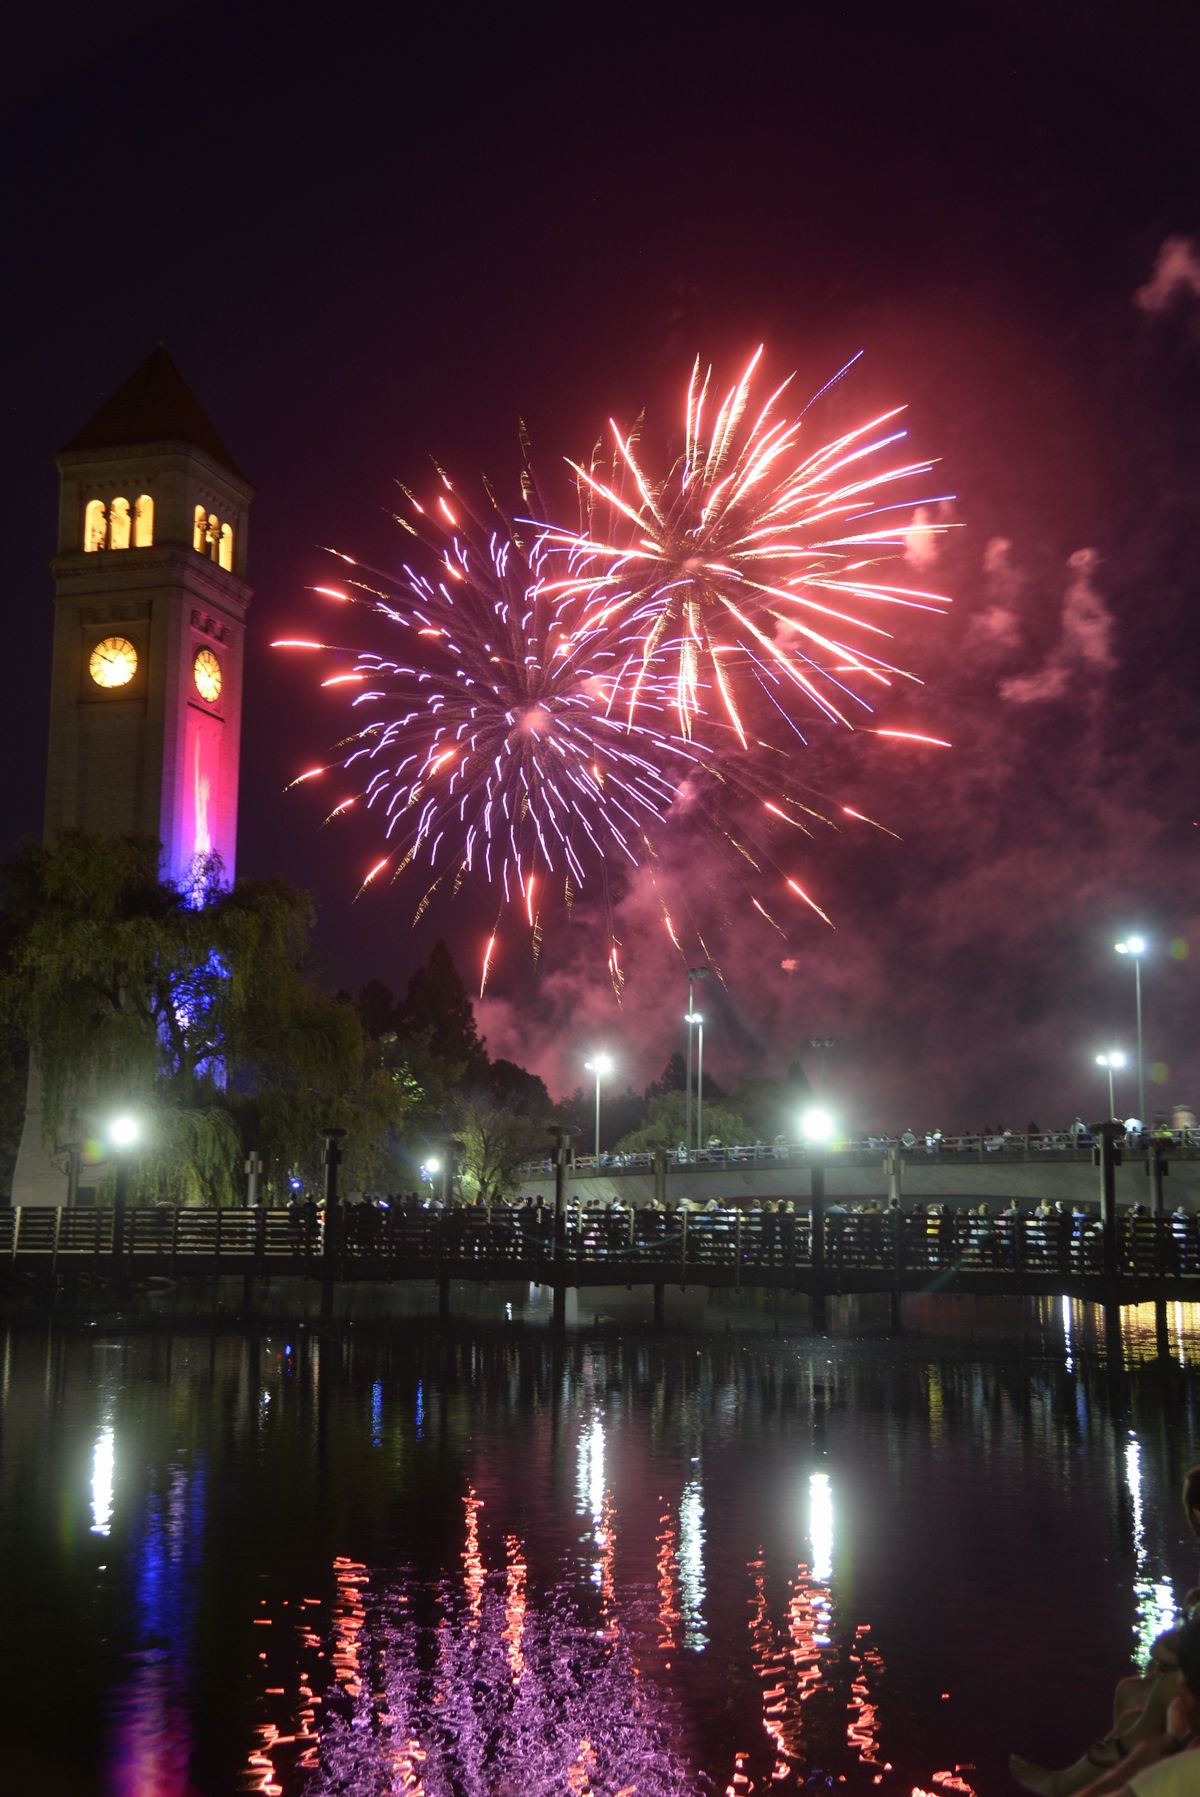 Fireworks explode Saturday over Riverfront Park as thousands watch the annual Fourth of July show in downtown Spokane. (Jesse Tinsley)